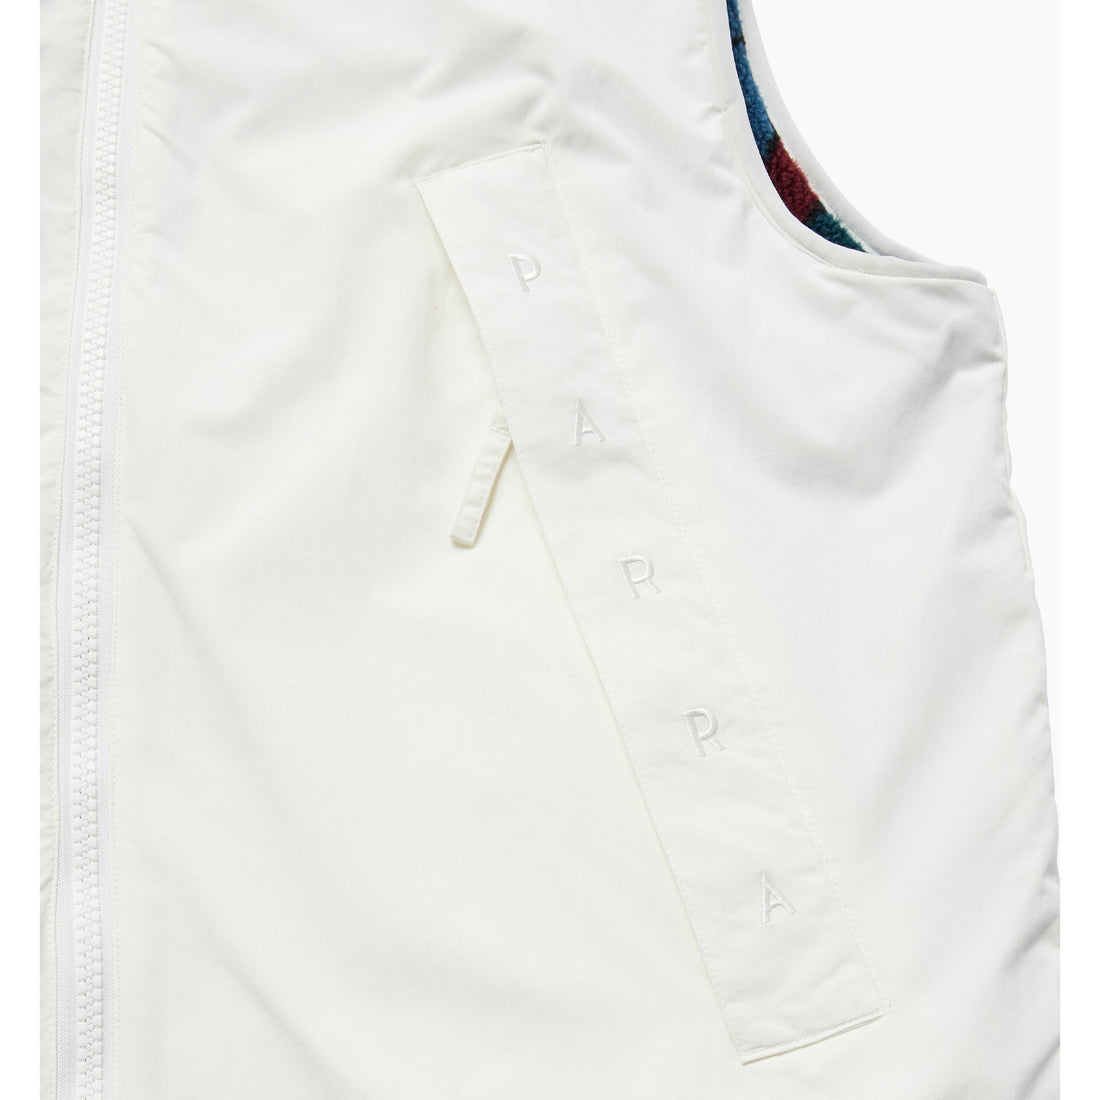 BY PARRA - TREES IN THE WIND REVERSIBLE VEST - BLANC